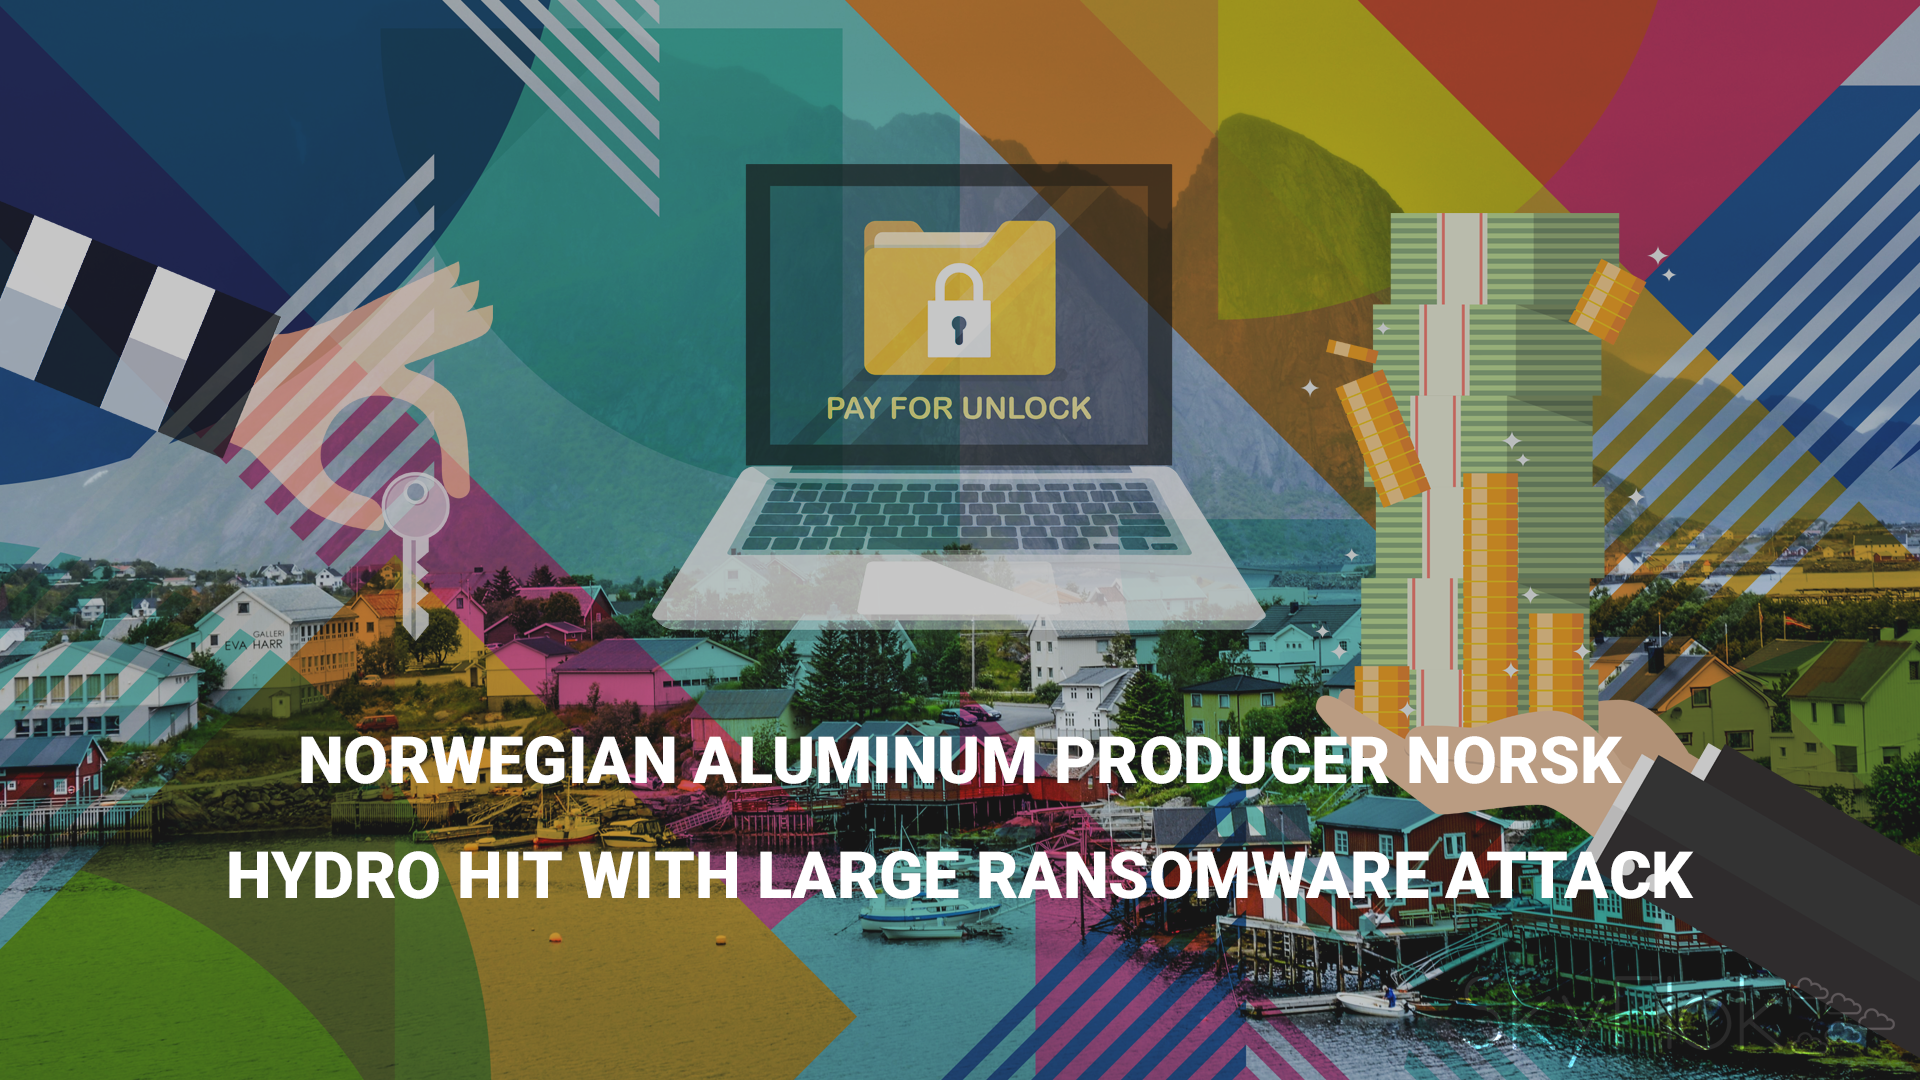 Norwegian aluminum producer Norsk Hydro hit with large ransomware attack